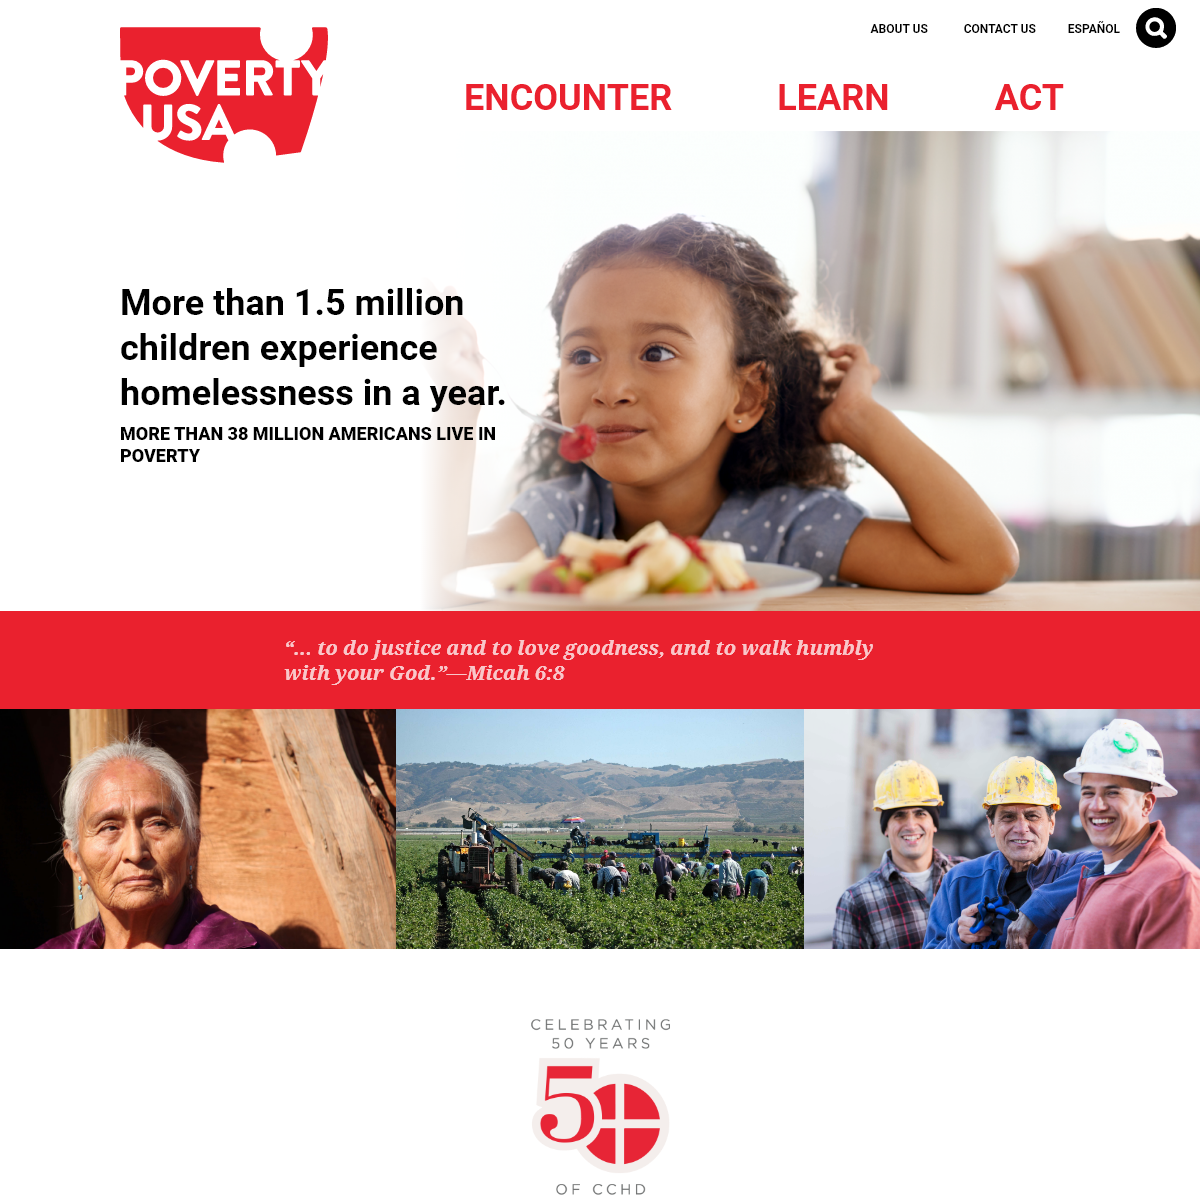 Poverty in The USA - Catholic Campaign for Human Development